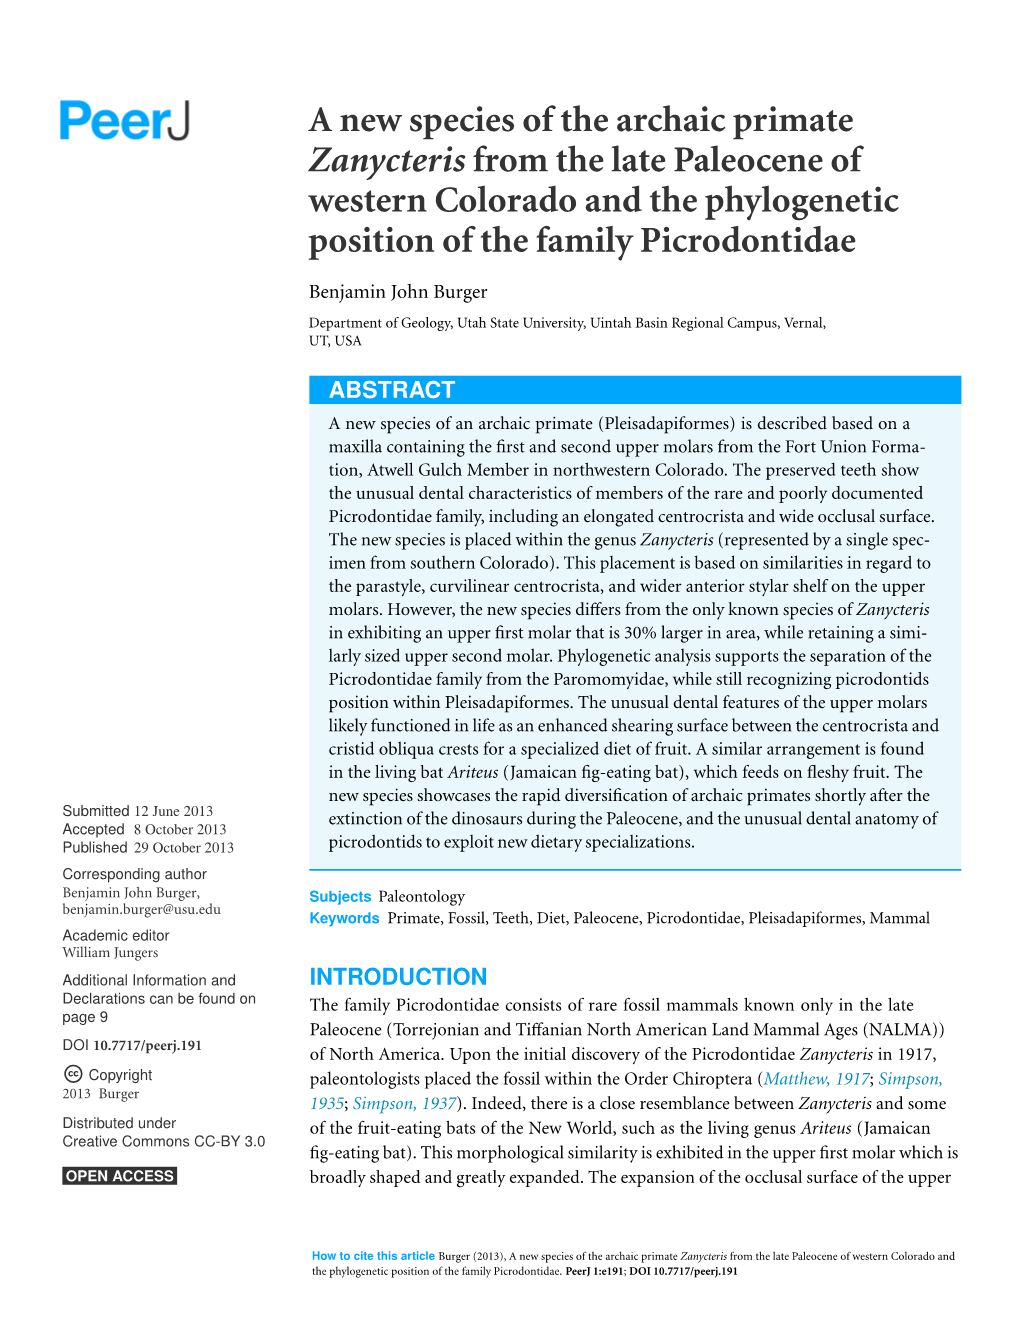 A New Species of the Archaic Primate Zanycteris from the Late Paleocene of Western Colorado and the Phylogenetic Position of the Family Picrodontidae